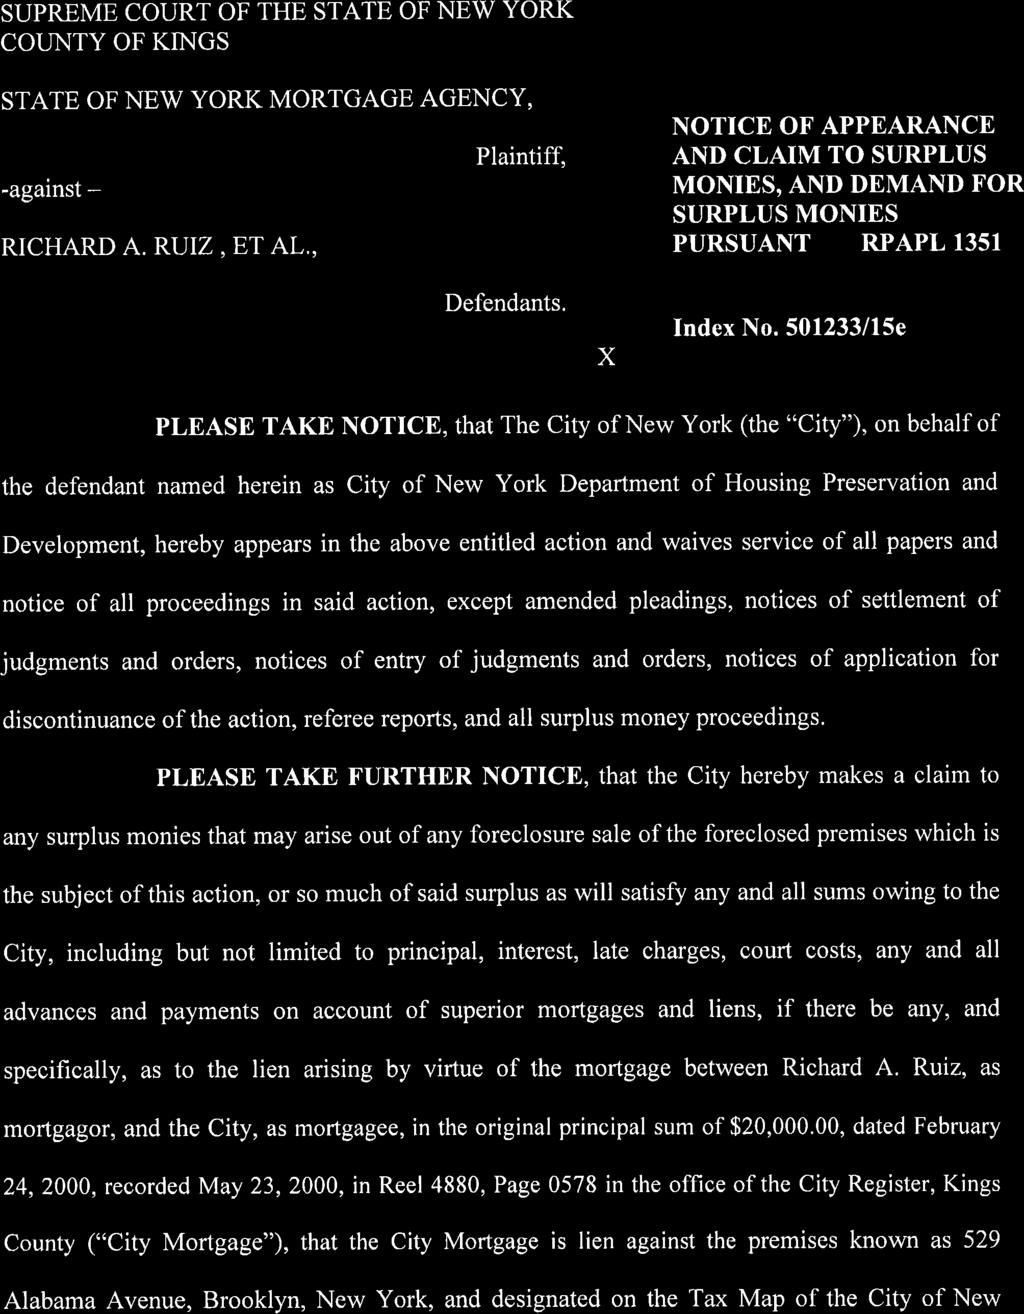 FILED: KINGS COUNTY CLERK 03/13/2015 02:20 PM INDEX NO. 501233/2015 NYSCEF DOC. NO. 7 RECEIVED NYSCEF: 03/13/2015 SUPREME COURT OF THE STATE OF NEW YORK COLINTY OF KINGS STATE OF NEV/ YORK MORTGAGE AGENCY, -against - RICHARD A.